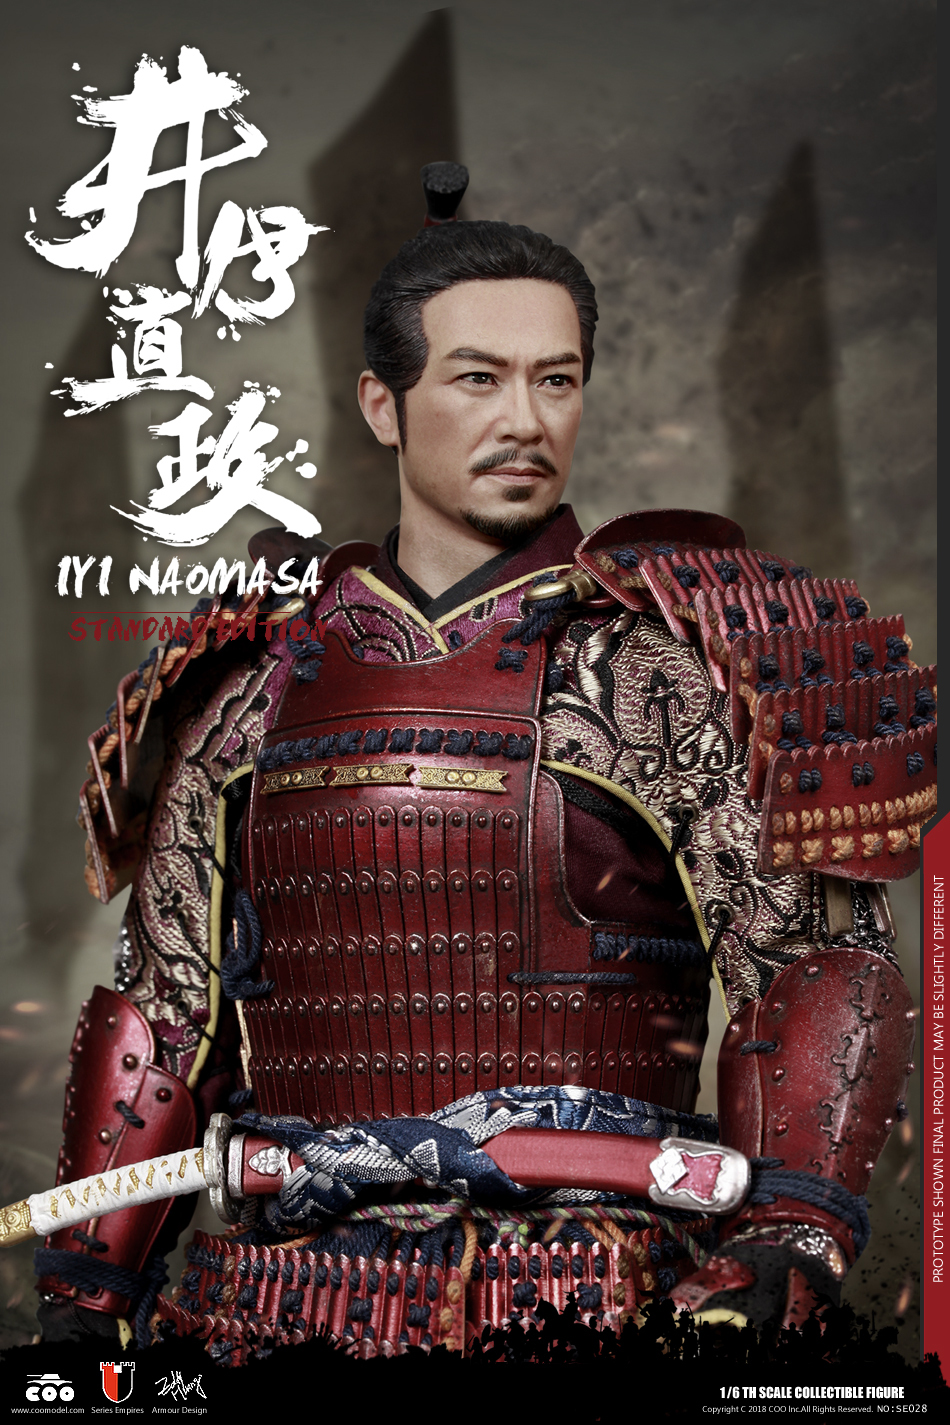 COOMODEL SE028 Series of Empires (Diecast Armor) Iyi Naomasa The